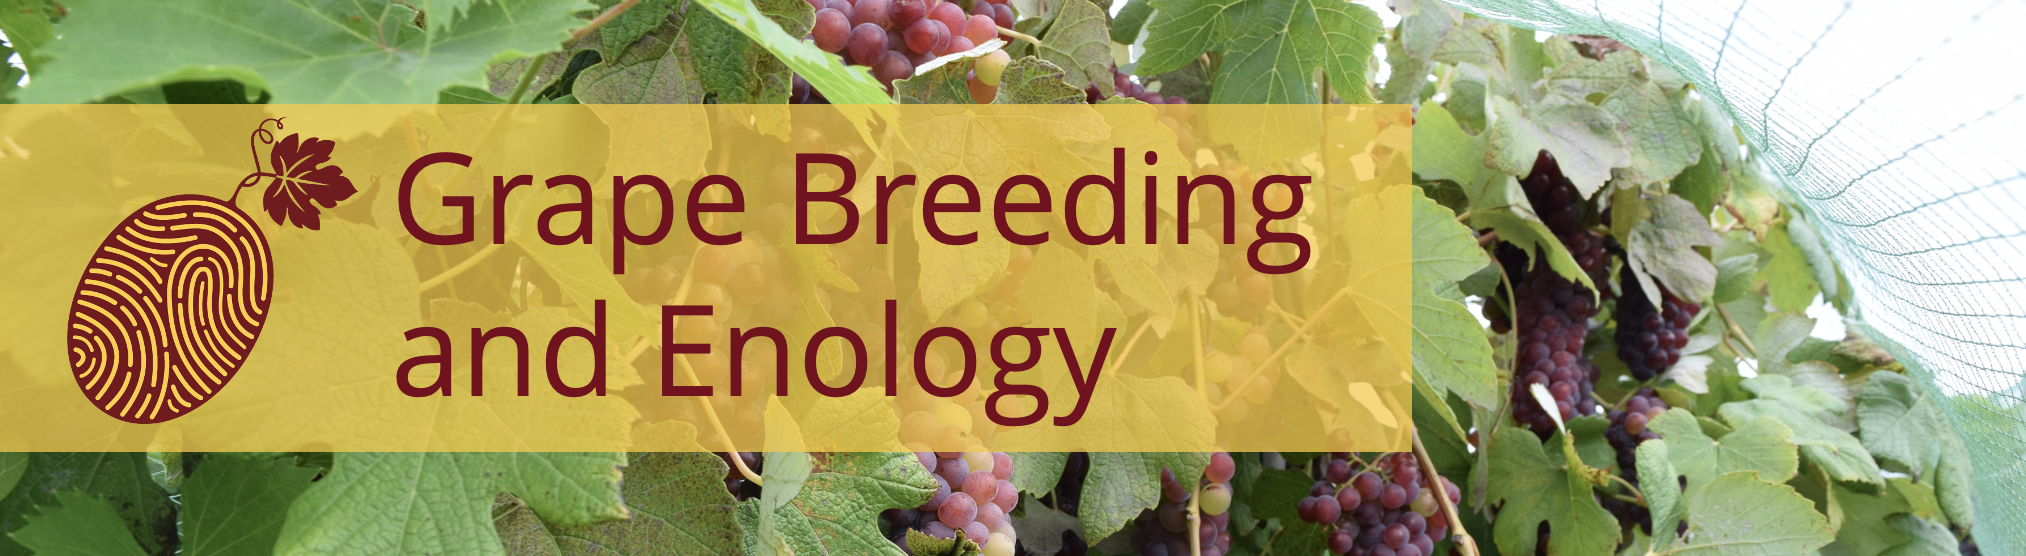 Image of red grape clusters with thumprint grape breeding logo and the words "Grape breeding and enology"